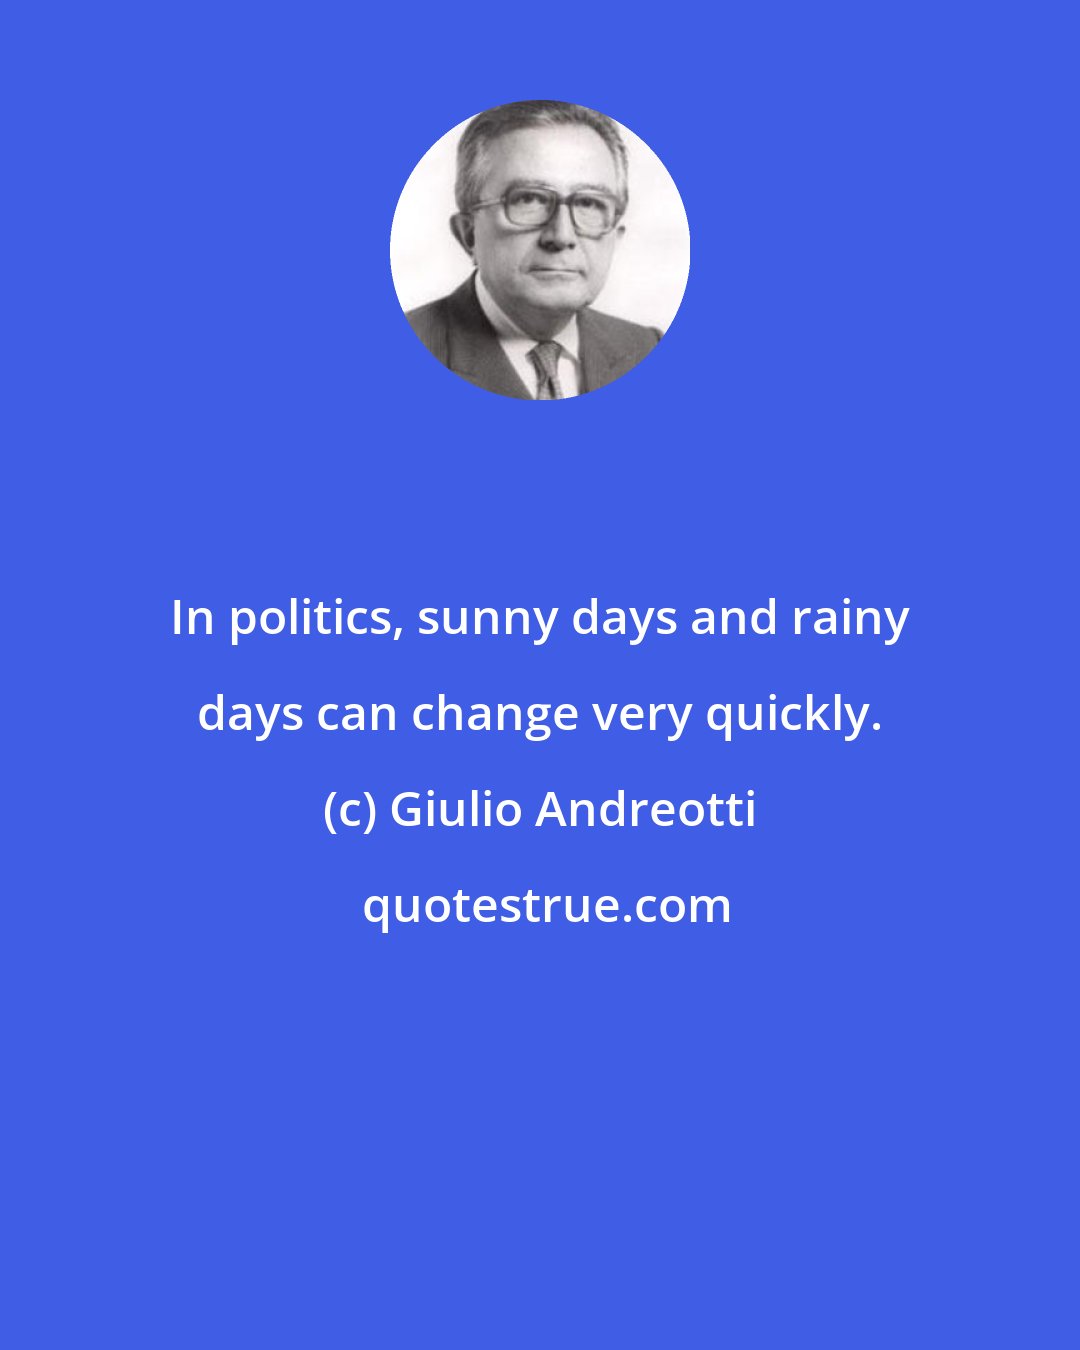 Giulio Andreotti: In politics, sunny days and rainy days can change very quickly.